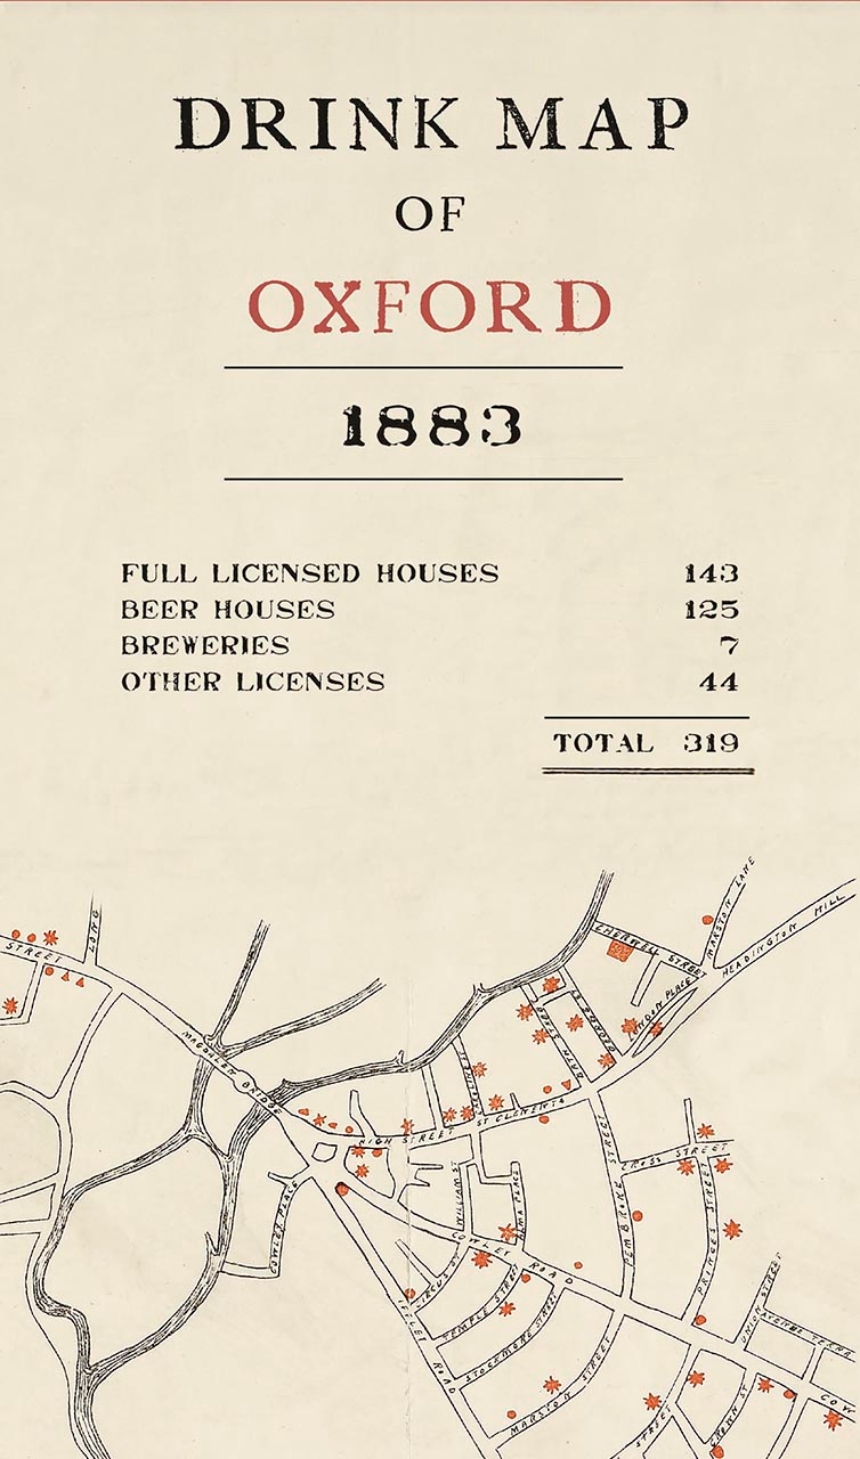 Drink Map of Oxford